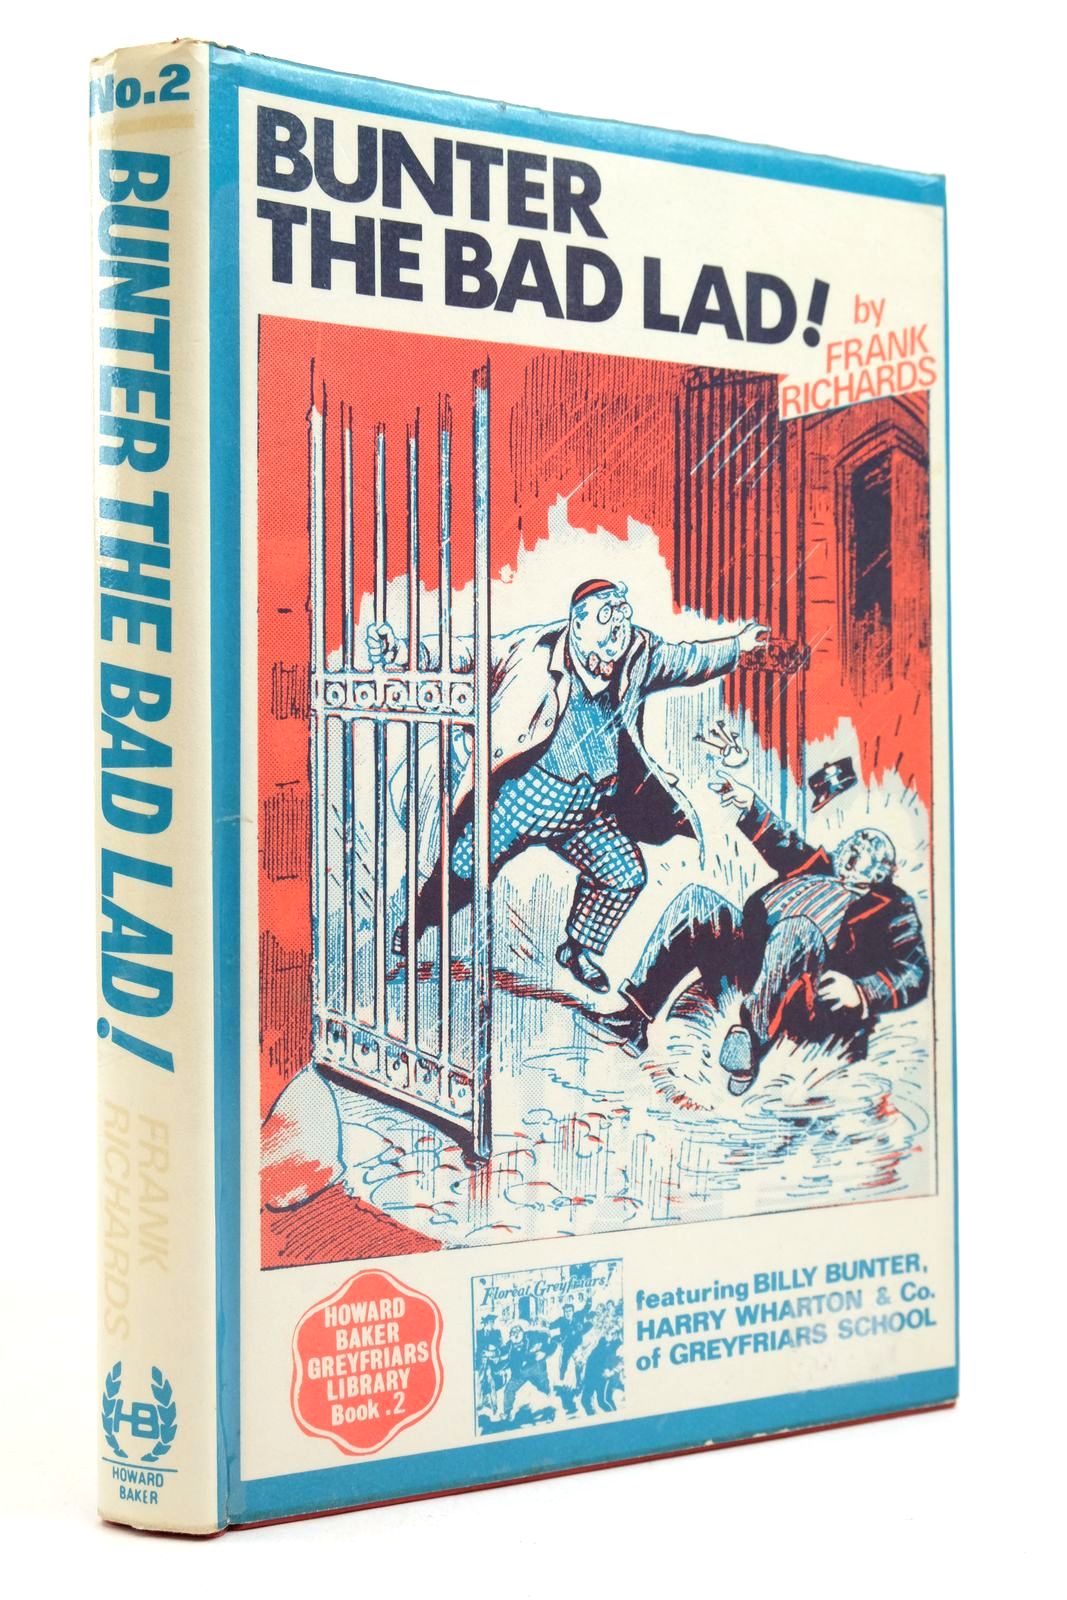 Photo of BUNTER THE BAD LAD! written by Richards, Frank published by Howard Baker (STOCK CODE: 2140634)  for sale by Stella & Rose's Books